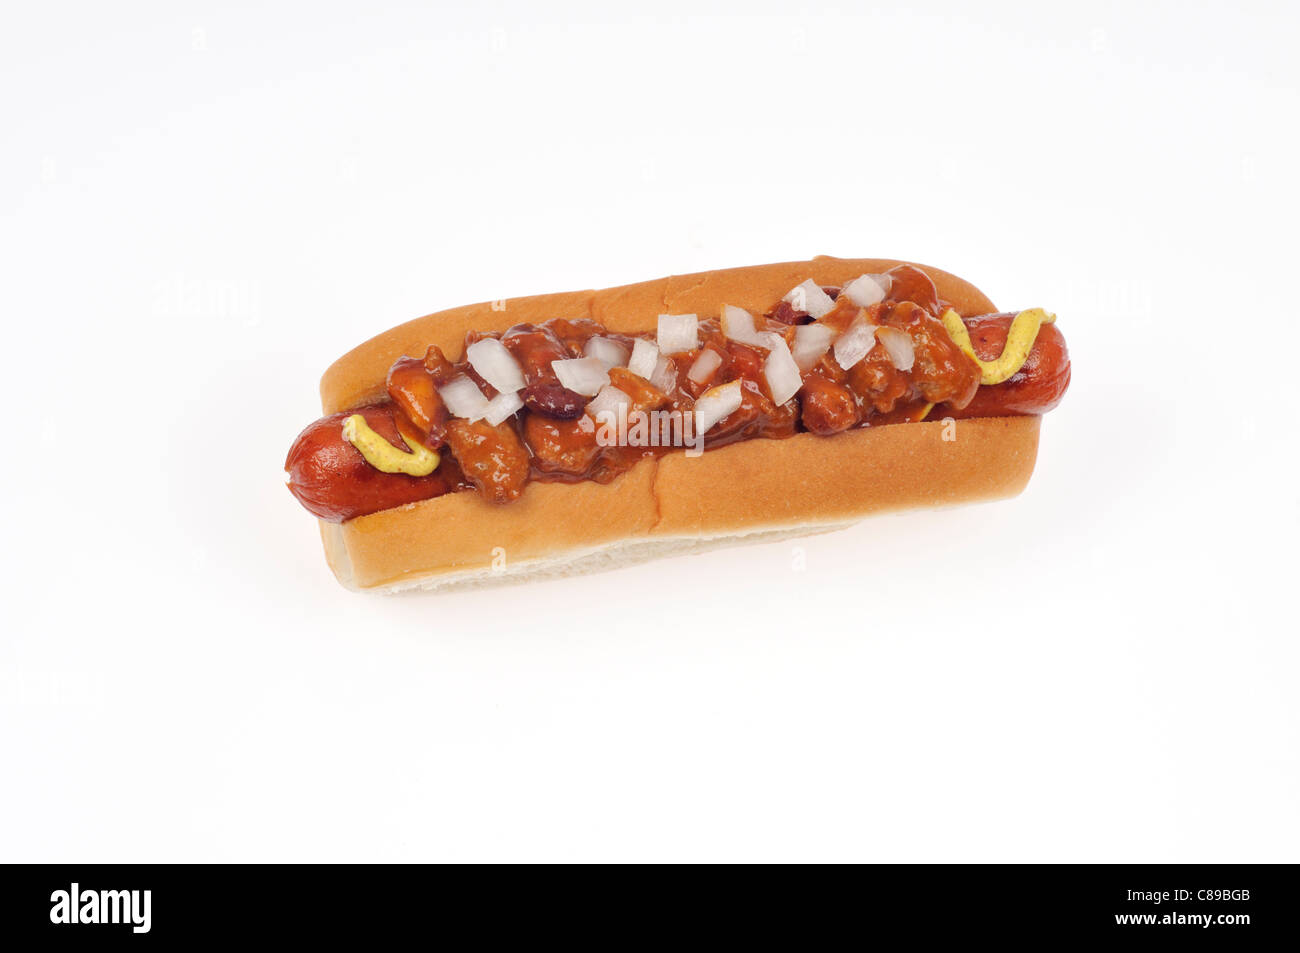 Chili dog with onions and mustard in bread roll on white background cut out Stock Photo